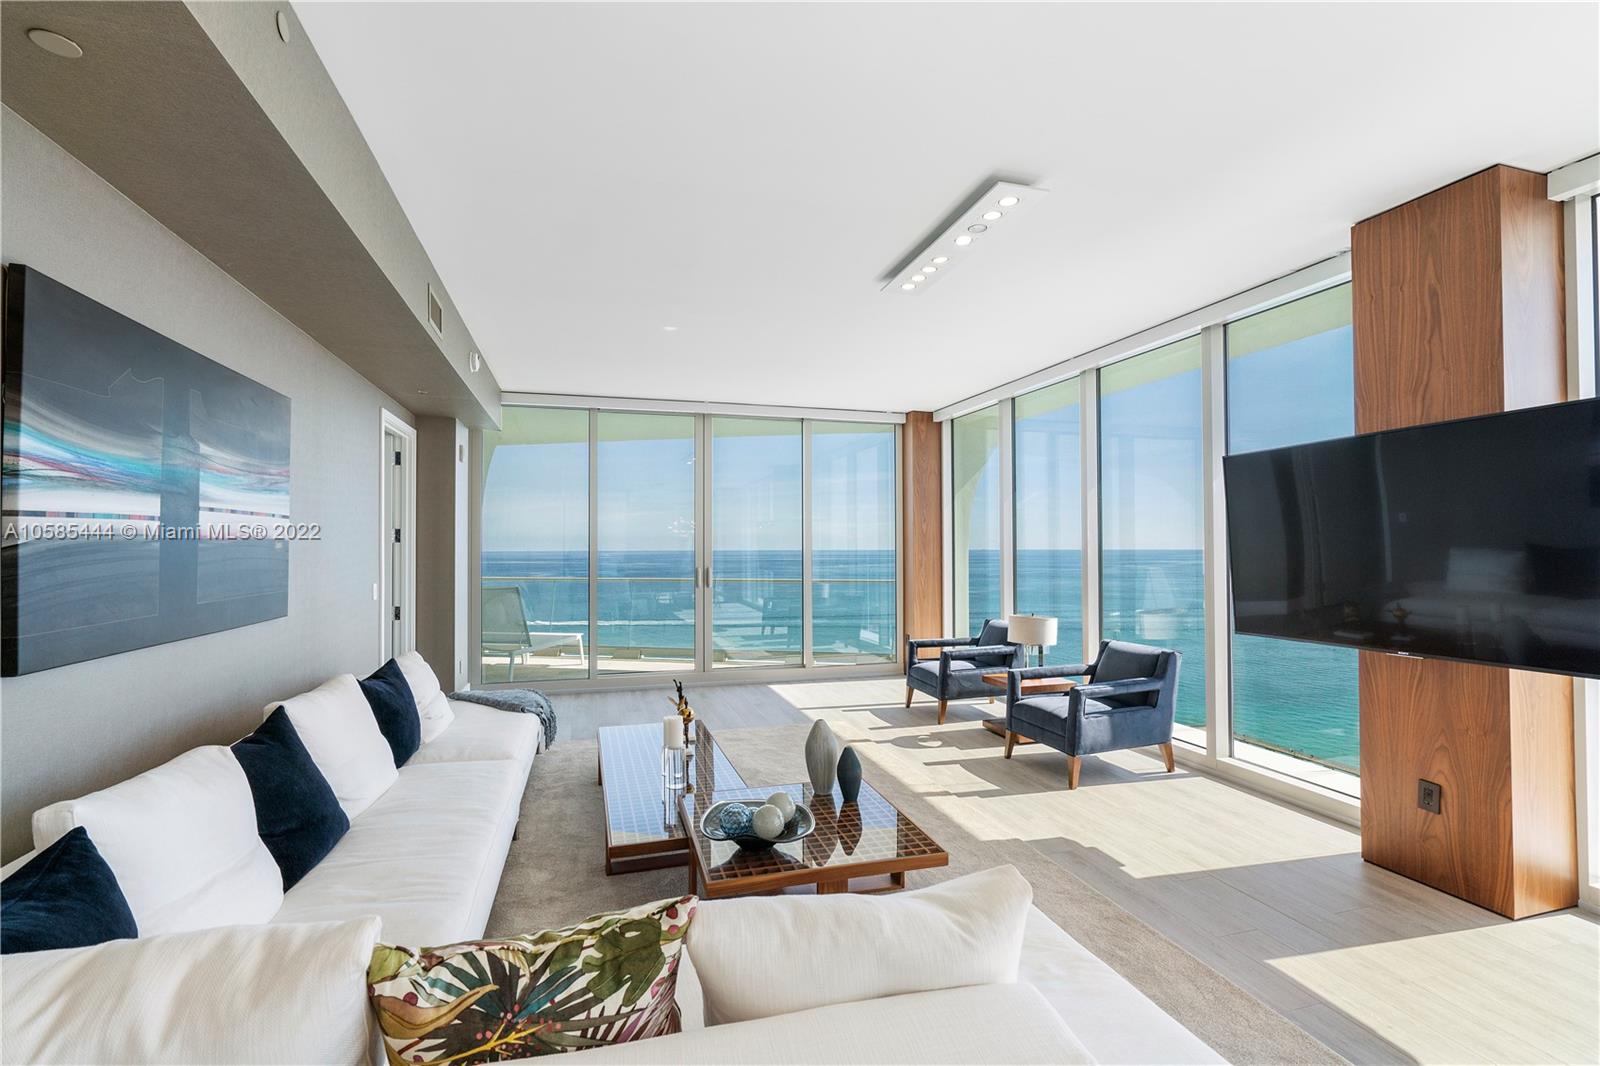 TURNKEY. BREATHTAKING PROFESSIONALLY FINISHED AND FURNISHED. BEST LINE IN BUILDING. SE UNIT WITH EXPANSIVE UNOBSTRUCTED VIEWS OVER THE SANDSPOINT.  LEASED UNTIL JUNE 2022.